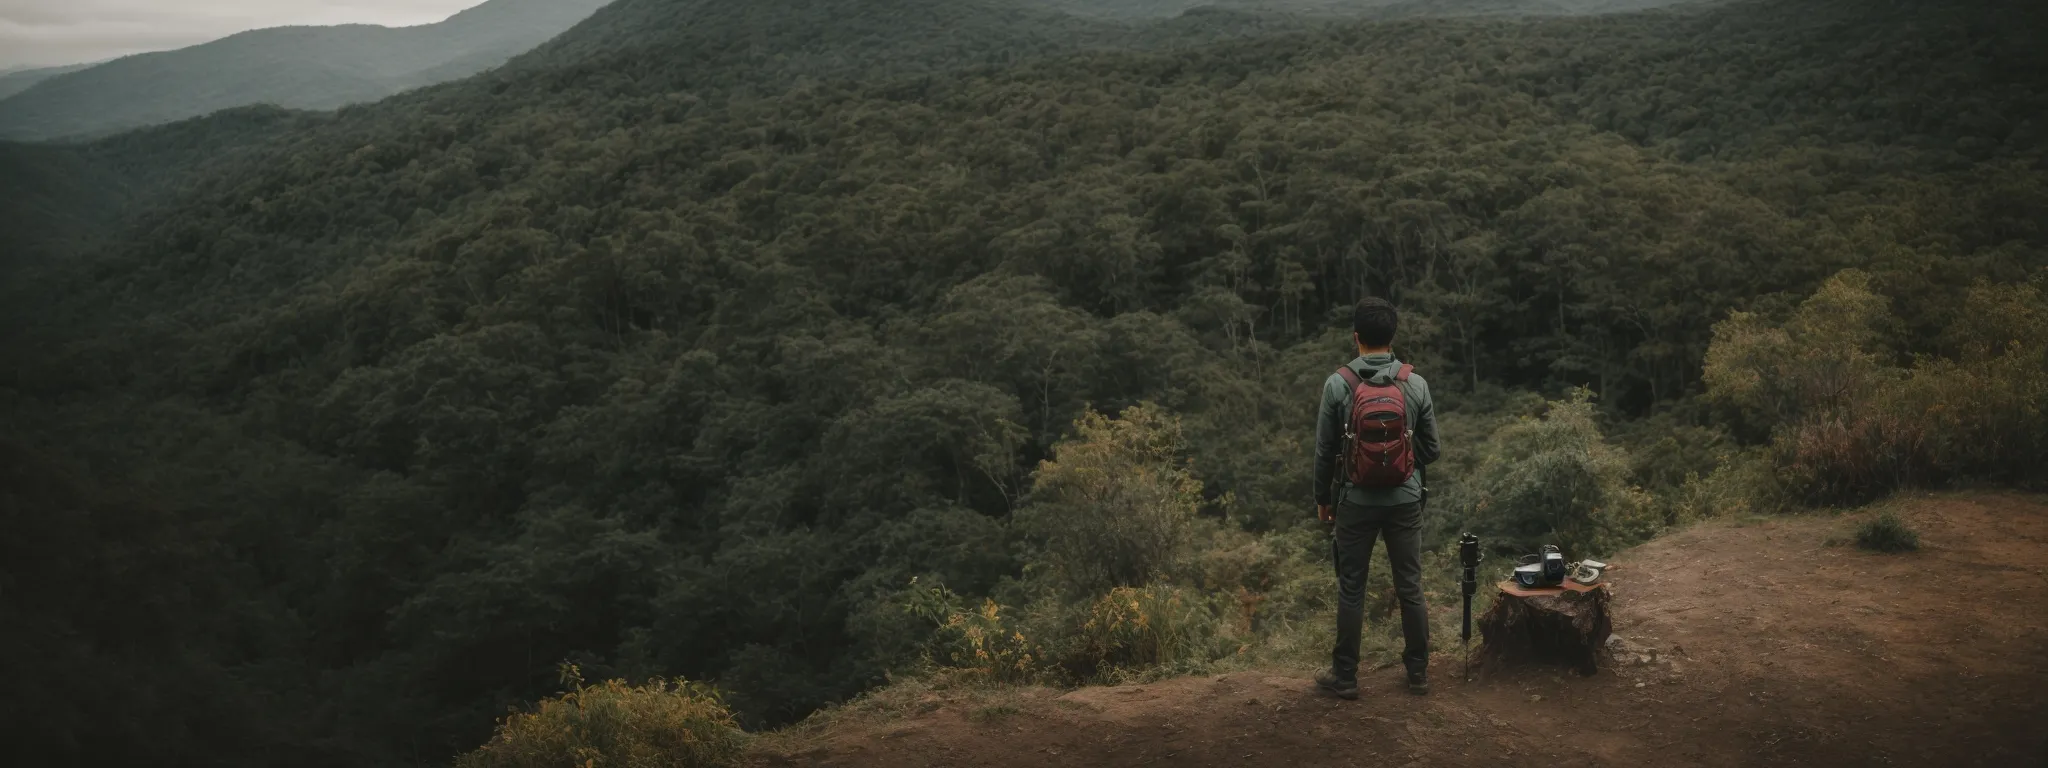 a person stands at the edge of an uncharted forest with a compass and map, symbolizing strategic exploration.